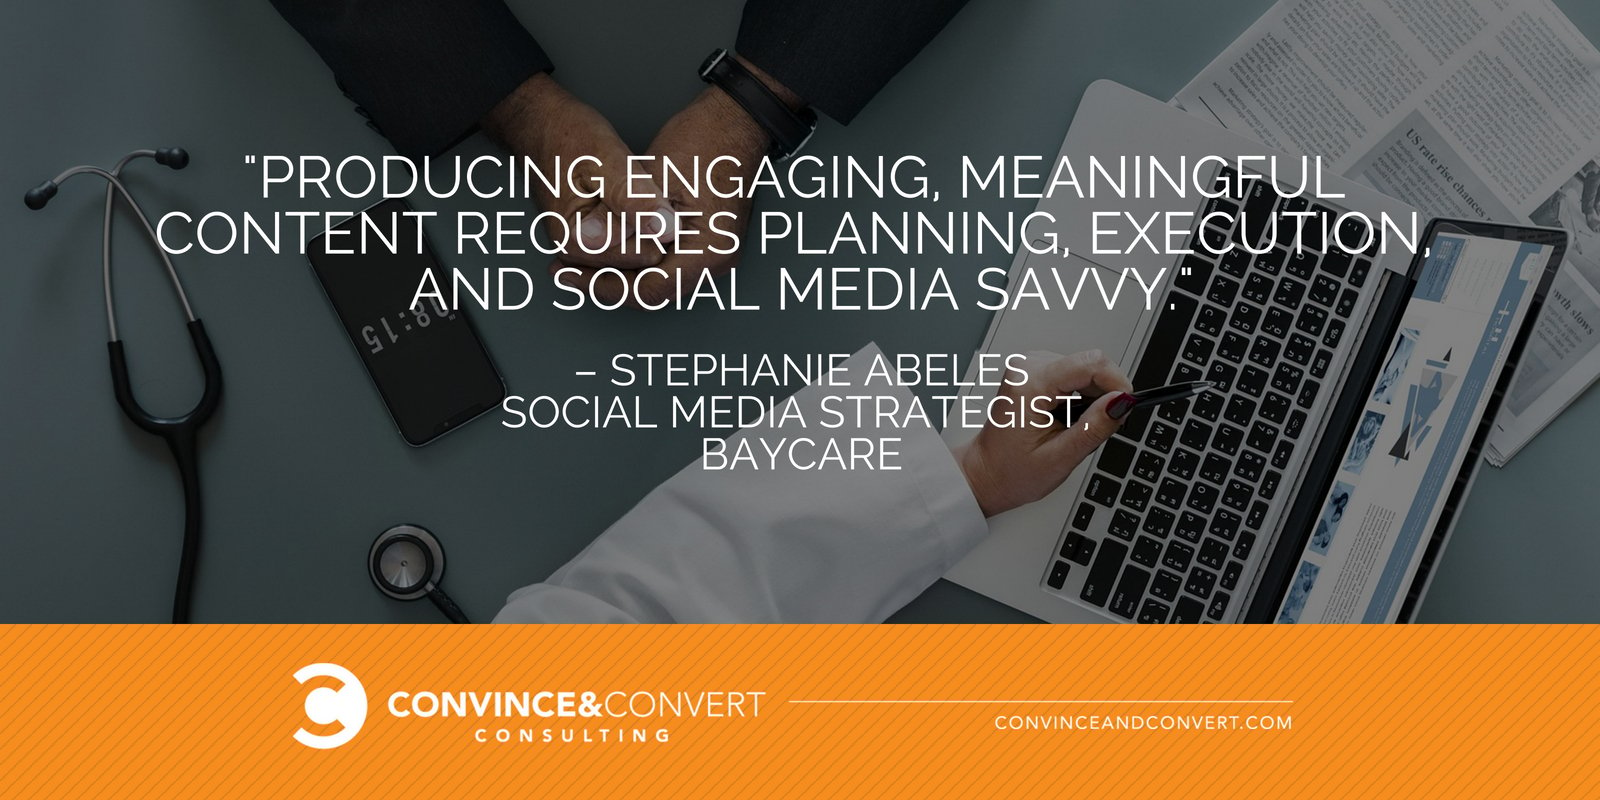 Producing engaging meaningful content